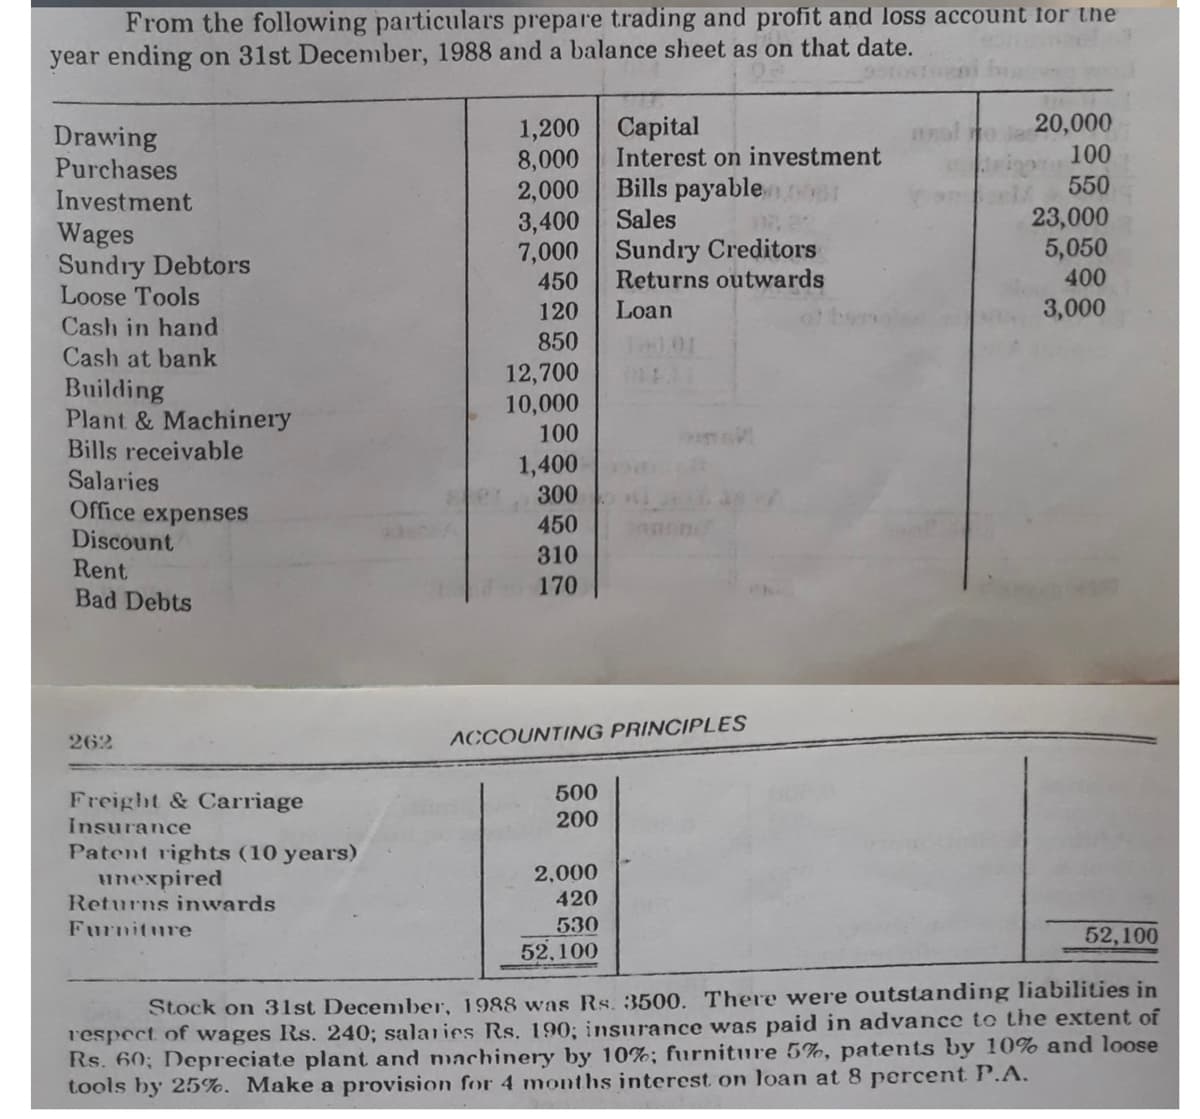 From the following particulars prepare trading and profit and loss account for the
year ending on 31st December, 1988 and a balance sheet as on that date.
20,000
Drawing
Purchases
Investment
Wages
Sundry Debtors
Loose Tools
Cash in hand
Cash at bank
1,200
8,000
2,000
3,400
7,000
450
Capital
Interest on investment
Bills payable
Sales
100
550
23,000
5,050
Sundry Creditors
Returns outwards
400
120
Loan
3,000
850
12,700
10,000
Building
Plant & Machinery
Bills receivable
Salaries
Office
Discount
Rent
Bad Debts
100
1,400
300
expenses
450
310
170
262
ACCOUNTING PRINCIPLES
500
Freight & Carriage
200
Insurance
Patent rights (10 years)
unexpired
Returns inwards
2,000
420
Furniture
530
52,100
52,100
Stock on 31st December, 1988 was Rs. 3500. There were outstanding liabilities in
respect of wages Rs. 240; salaries Rs. 190; insurance was paid in advance to the extent of
Rs. 60; Depreciate plant and machinery by 10%; furniture 5%, patents by 10% and loose
tools by 25%. Make a provision for 4 months interest on loan at 8 percent P.A.
